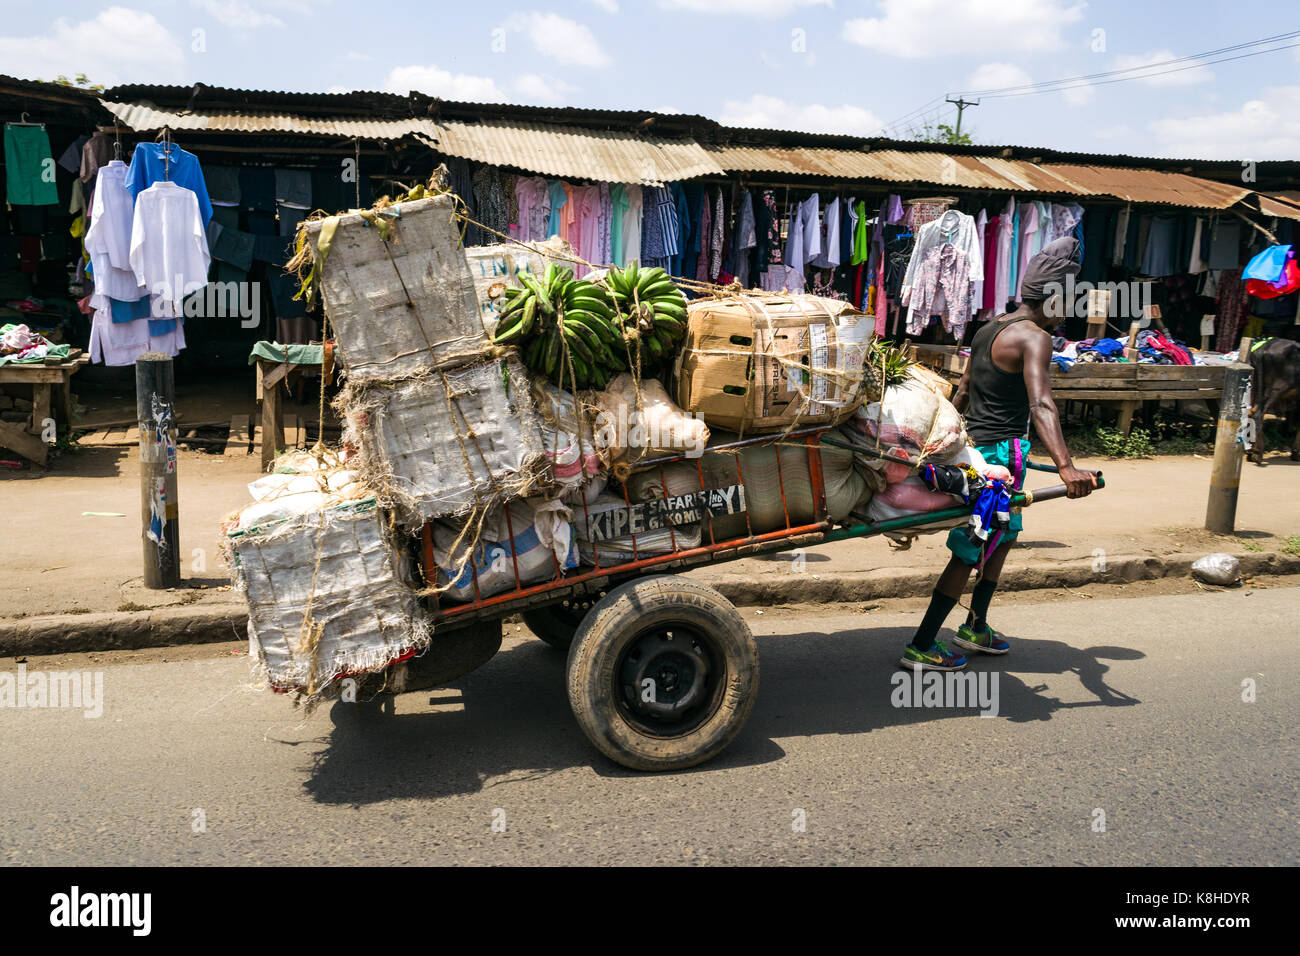 A man pulls a handcart with goods on along road with clothes stalls on pavement in background, Nairobi, Kenya Stock Photo